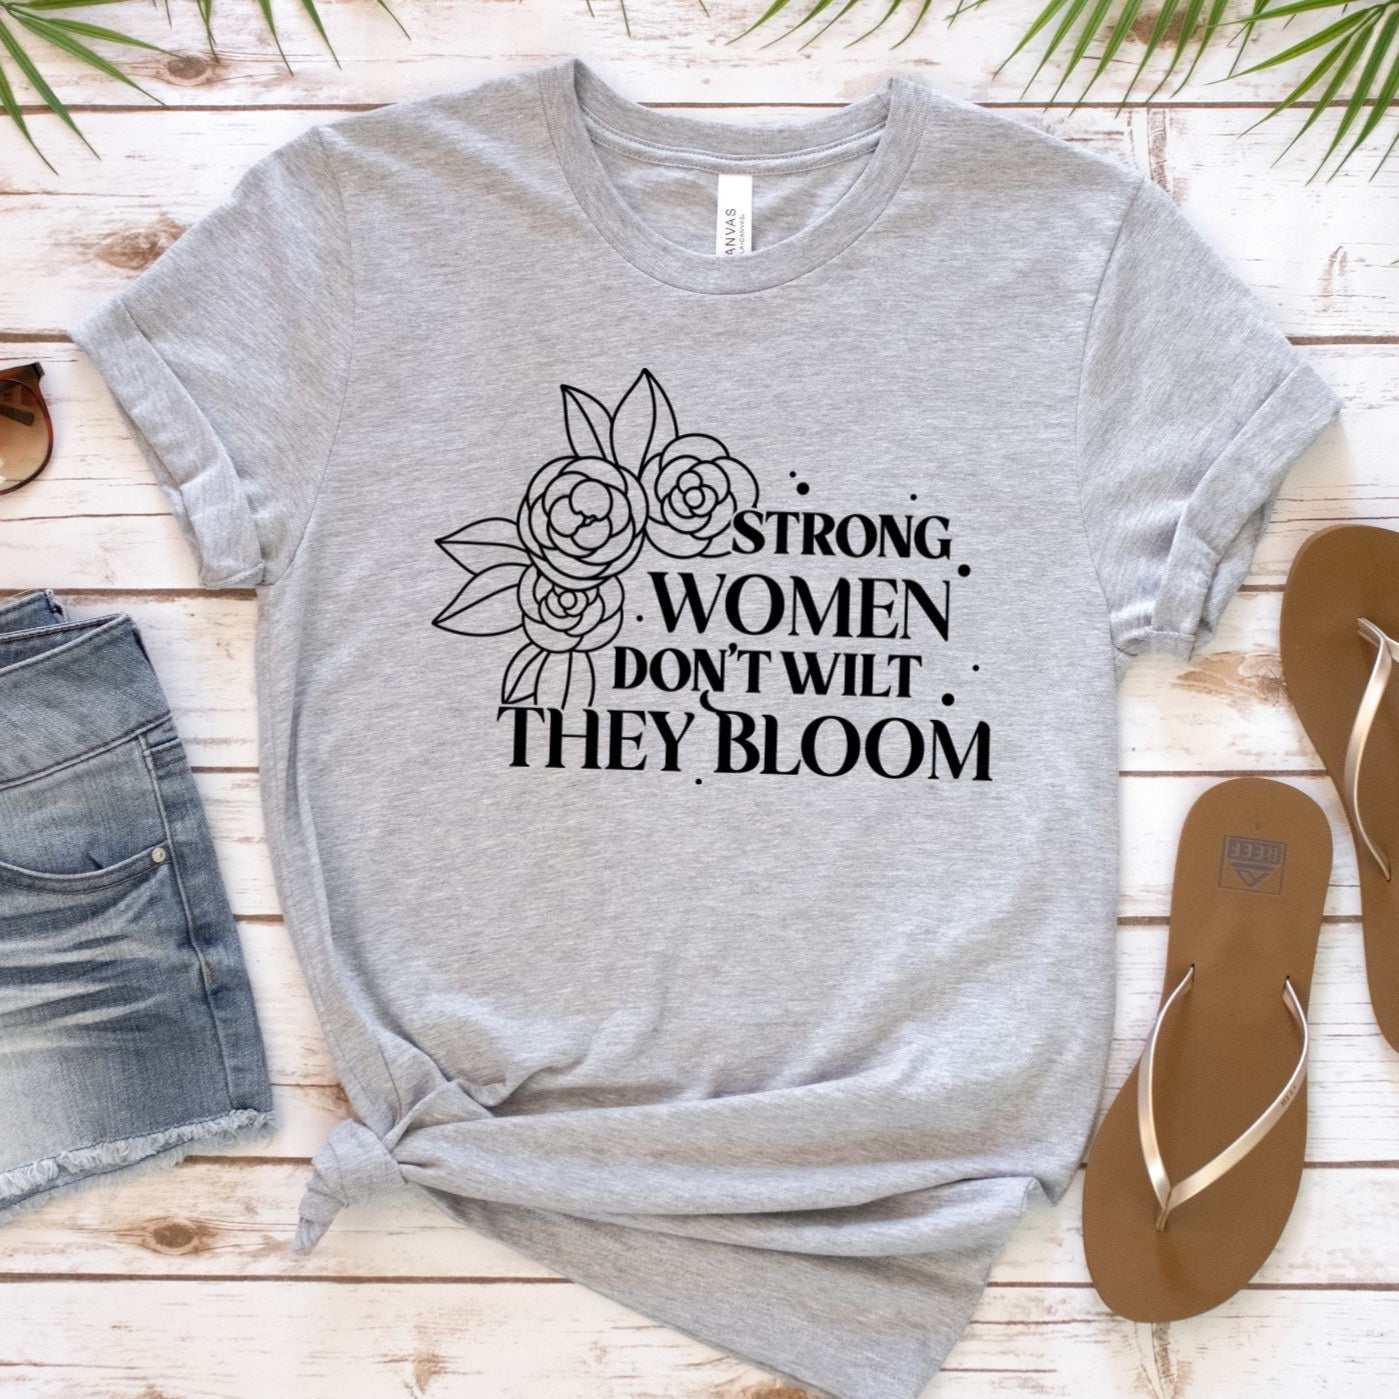 Stong Women Don't Wilt They Bloom Natural T-Shirt with Roses; Women Empowerment Shirt